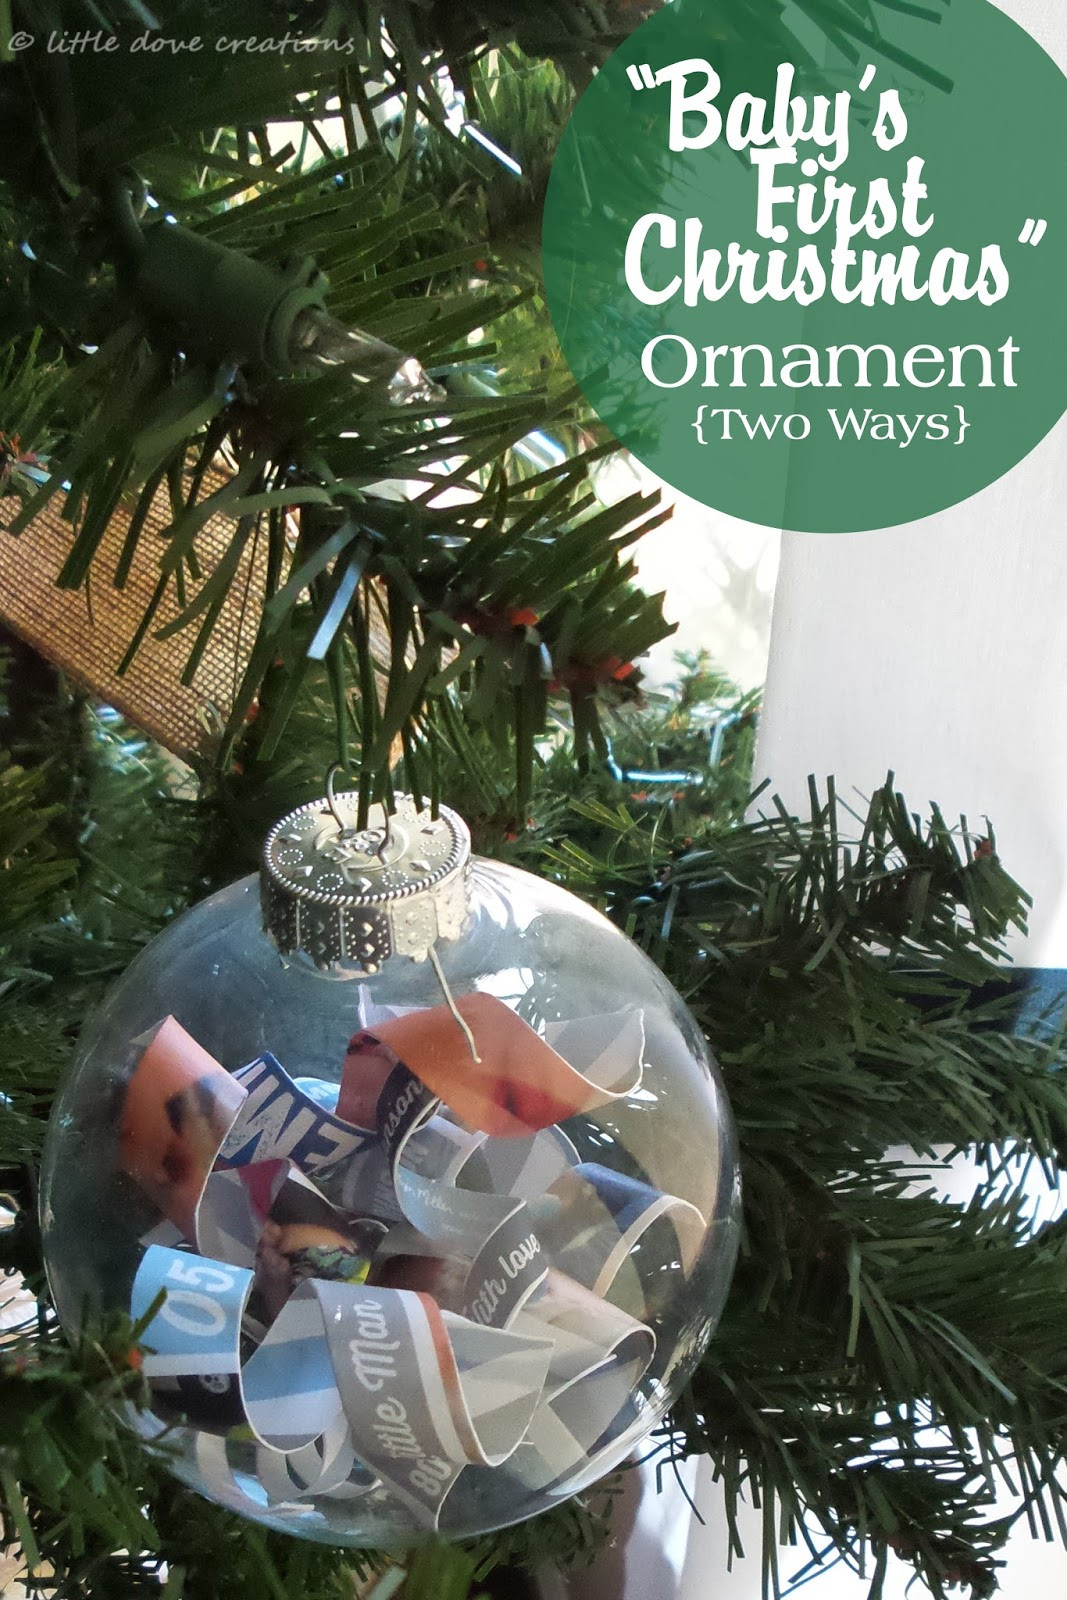 Best ideas about DIY Baby'S First Christmas Ornament
. Save or Pin diy “baby’s first Christmas” ornaments Now.